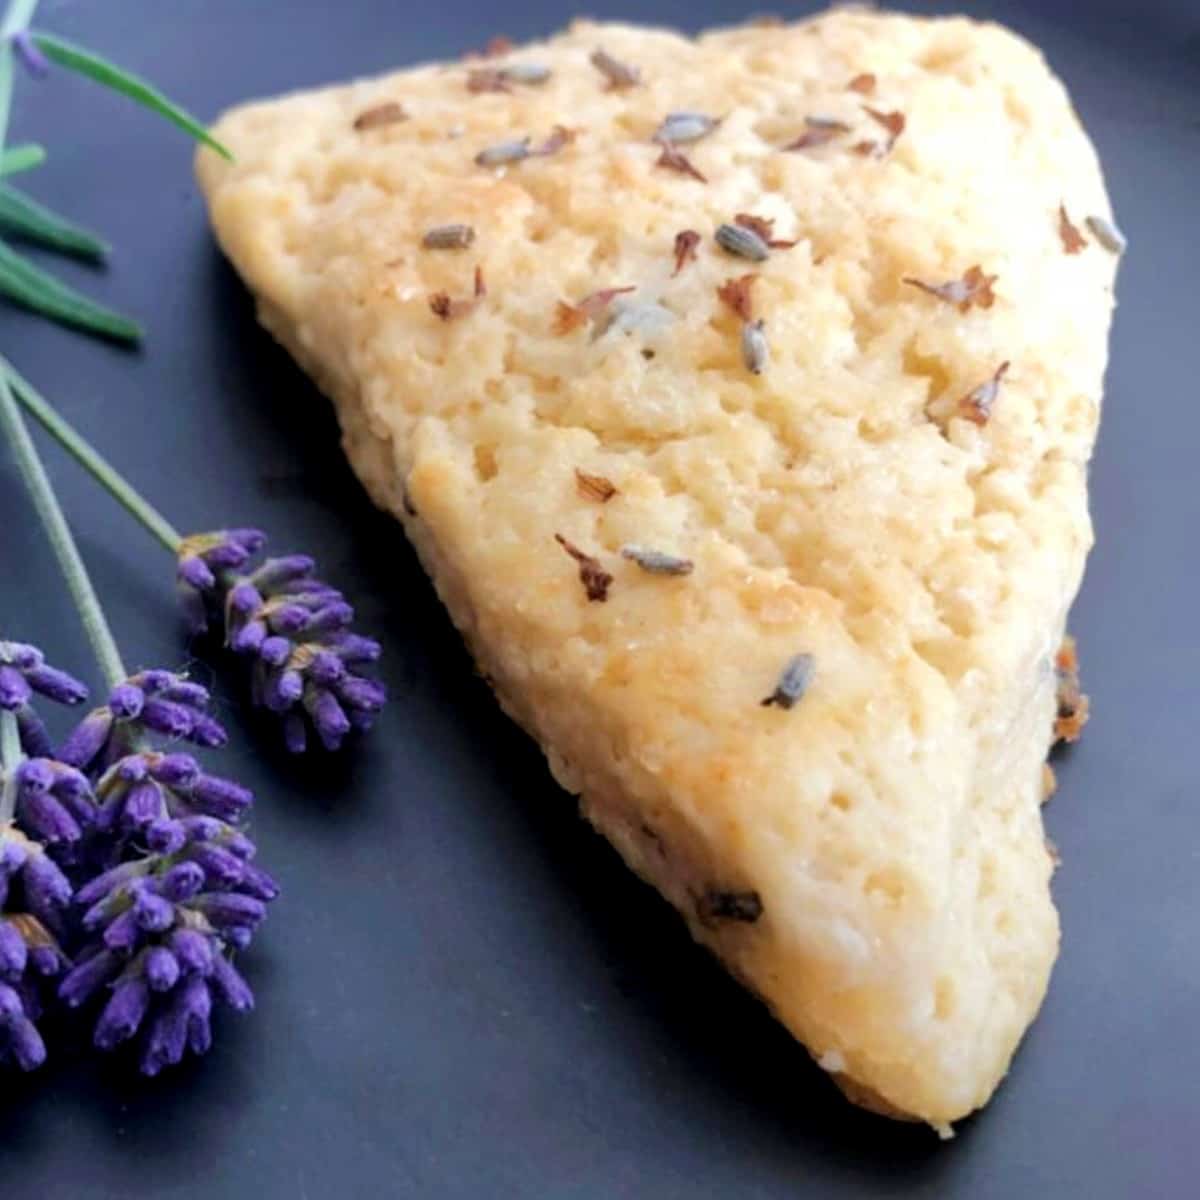 A slice of scone with lavender on a black plate.